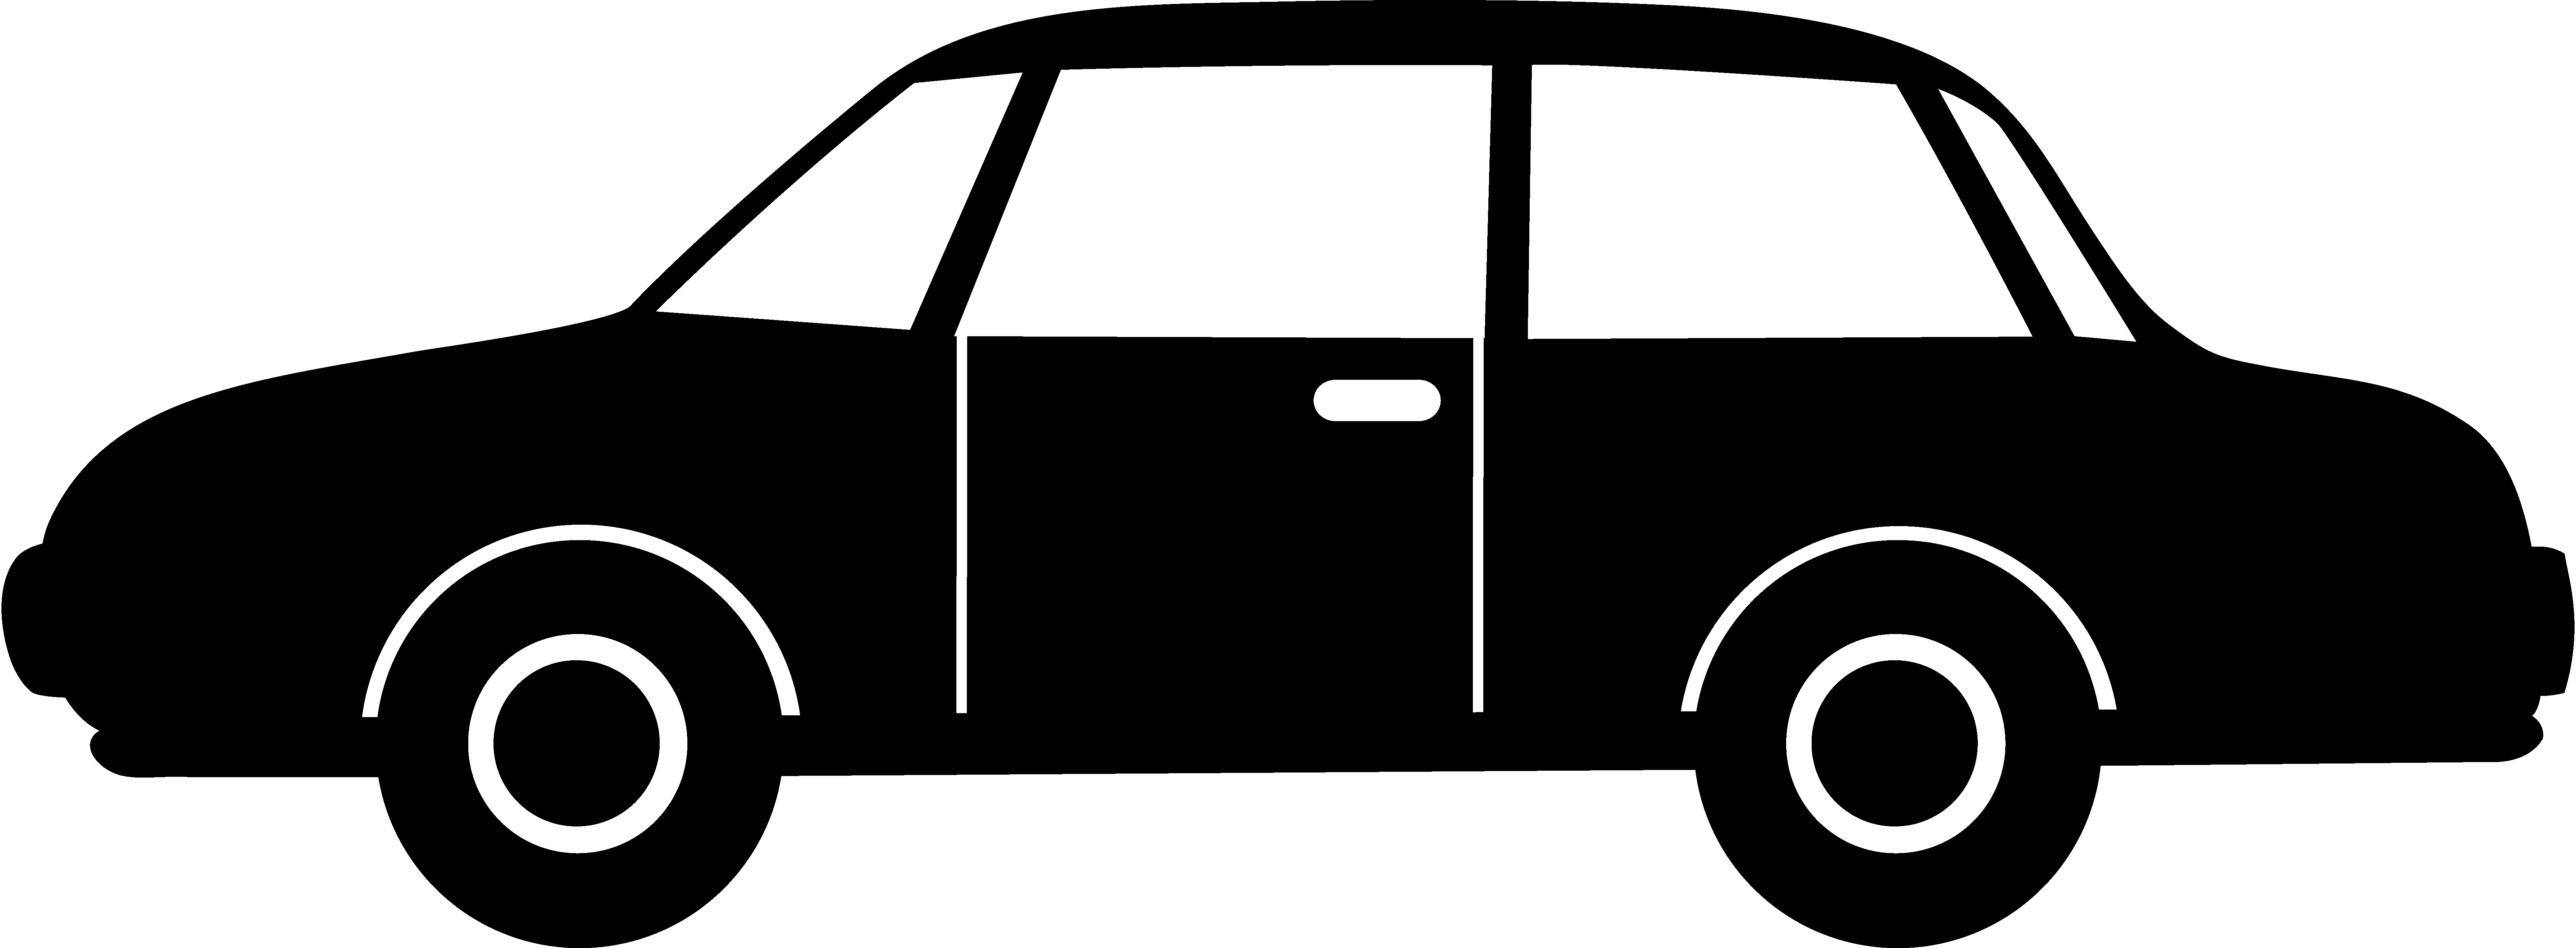 Toy Car Clipart Black And White | Clipart Panda - Free Clipart Images